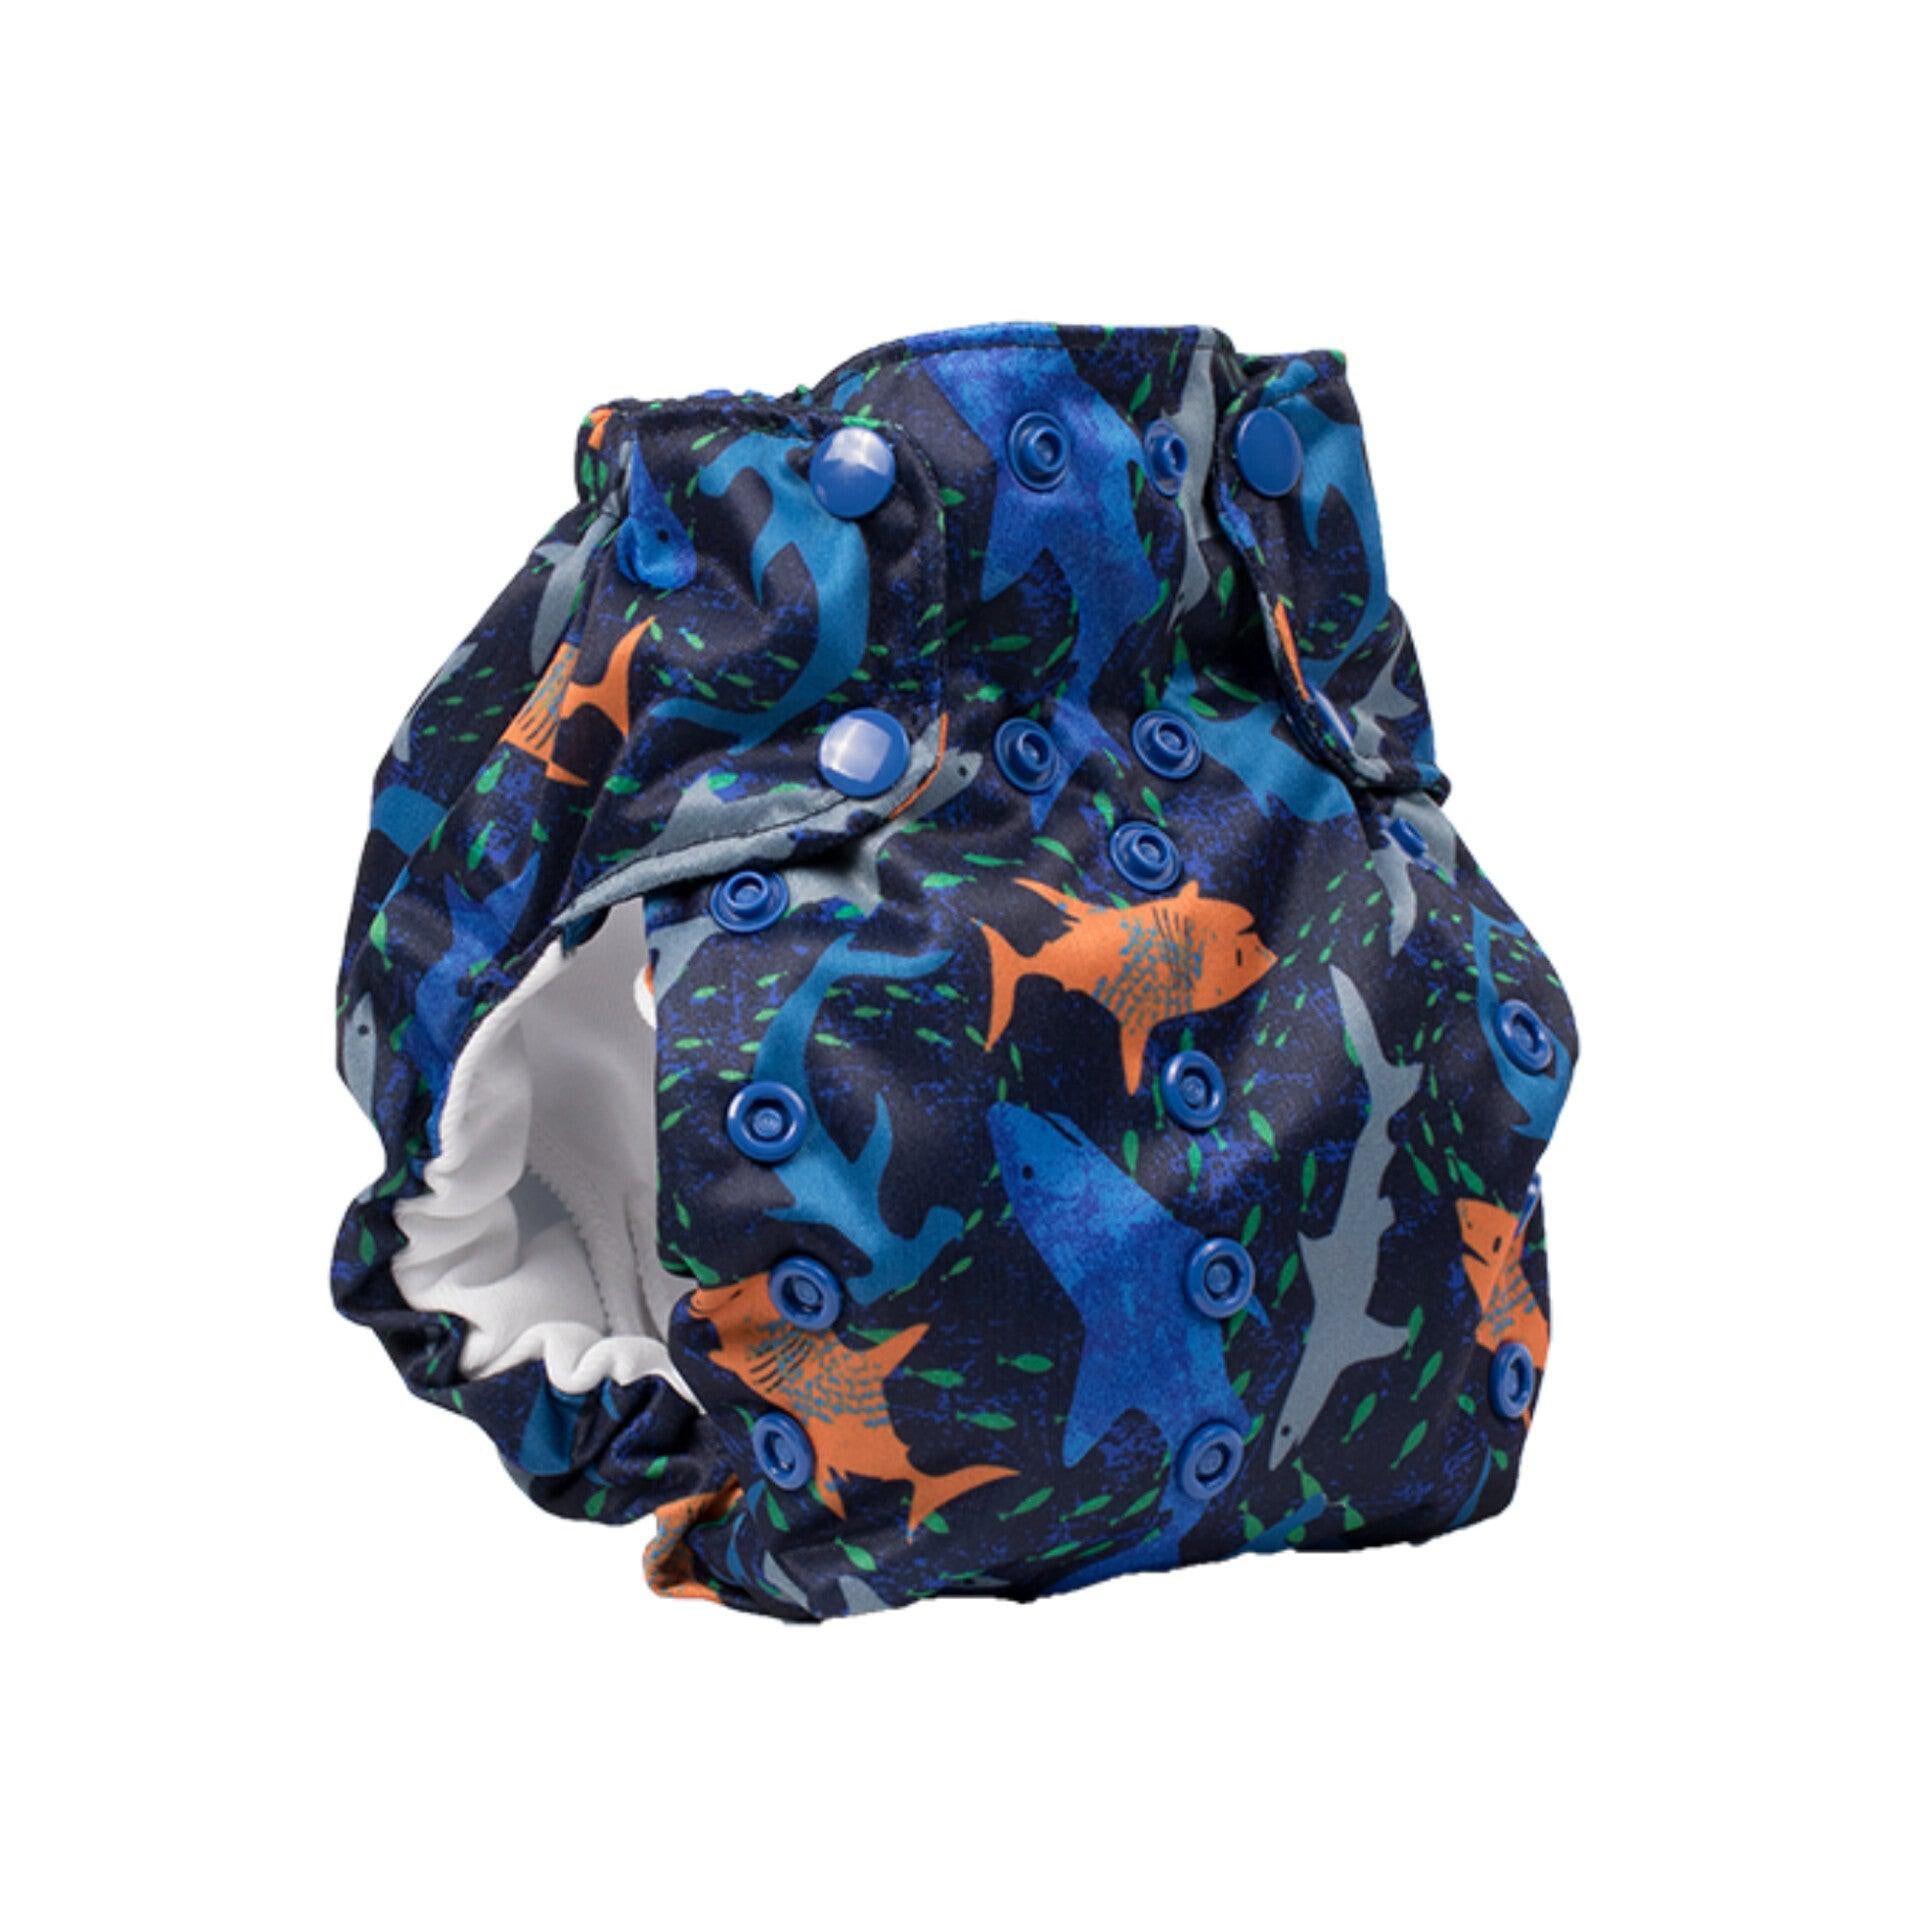 Smart Bottoms 3.1 All in One Organic Cloth Nappy-All In One Nappy-Smart Bottoms-Sharks-The Nappy Market